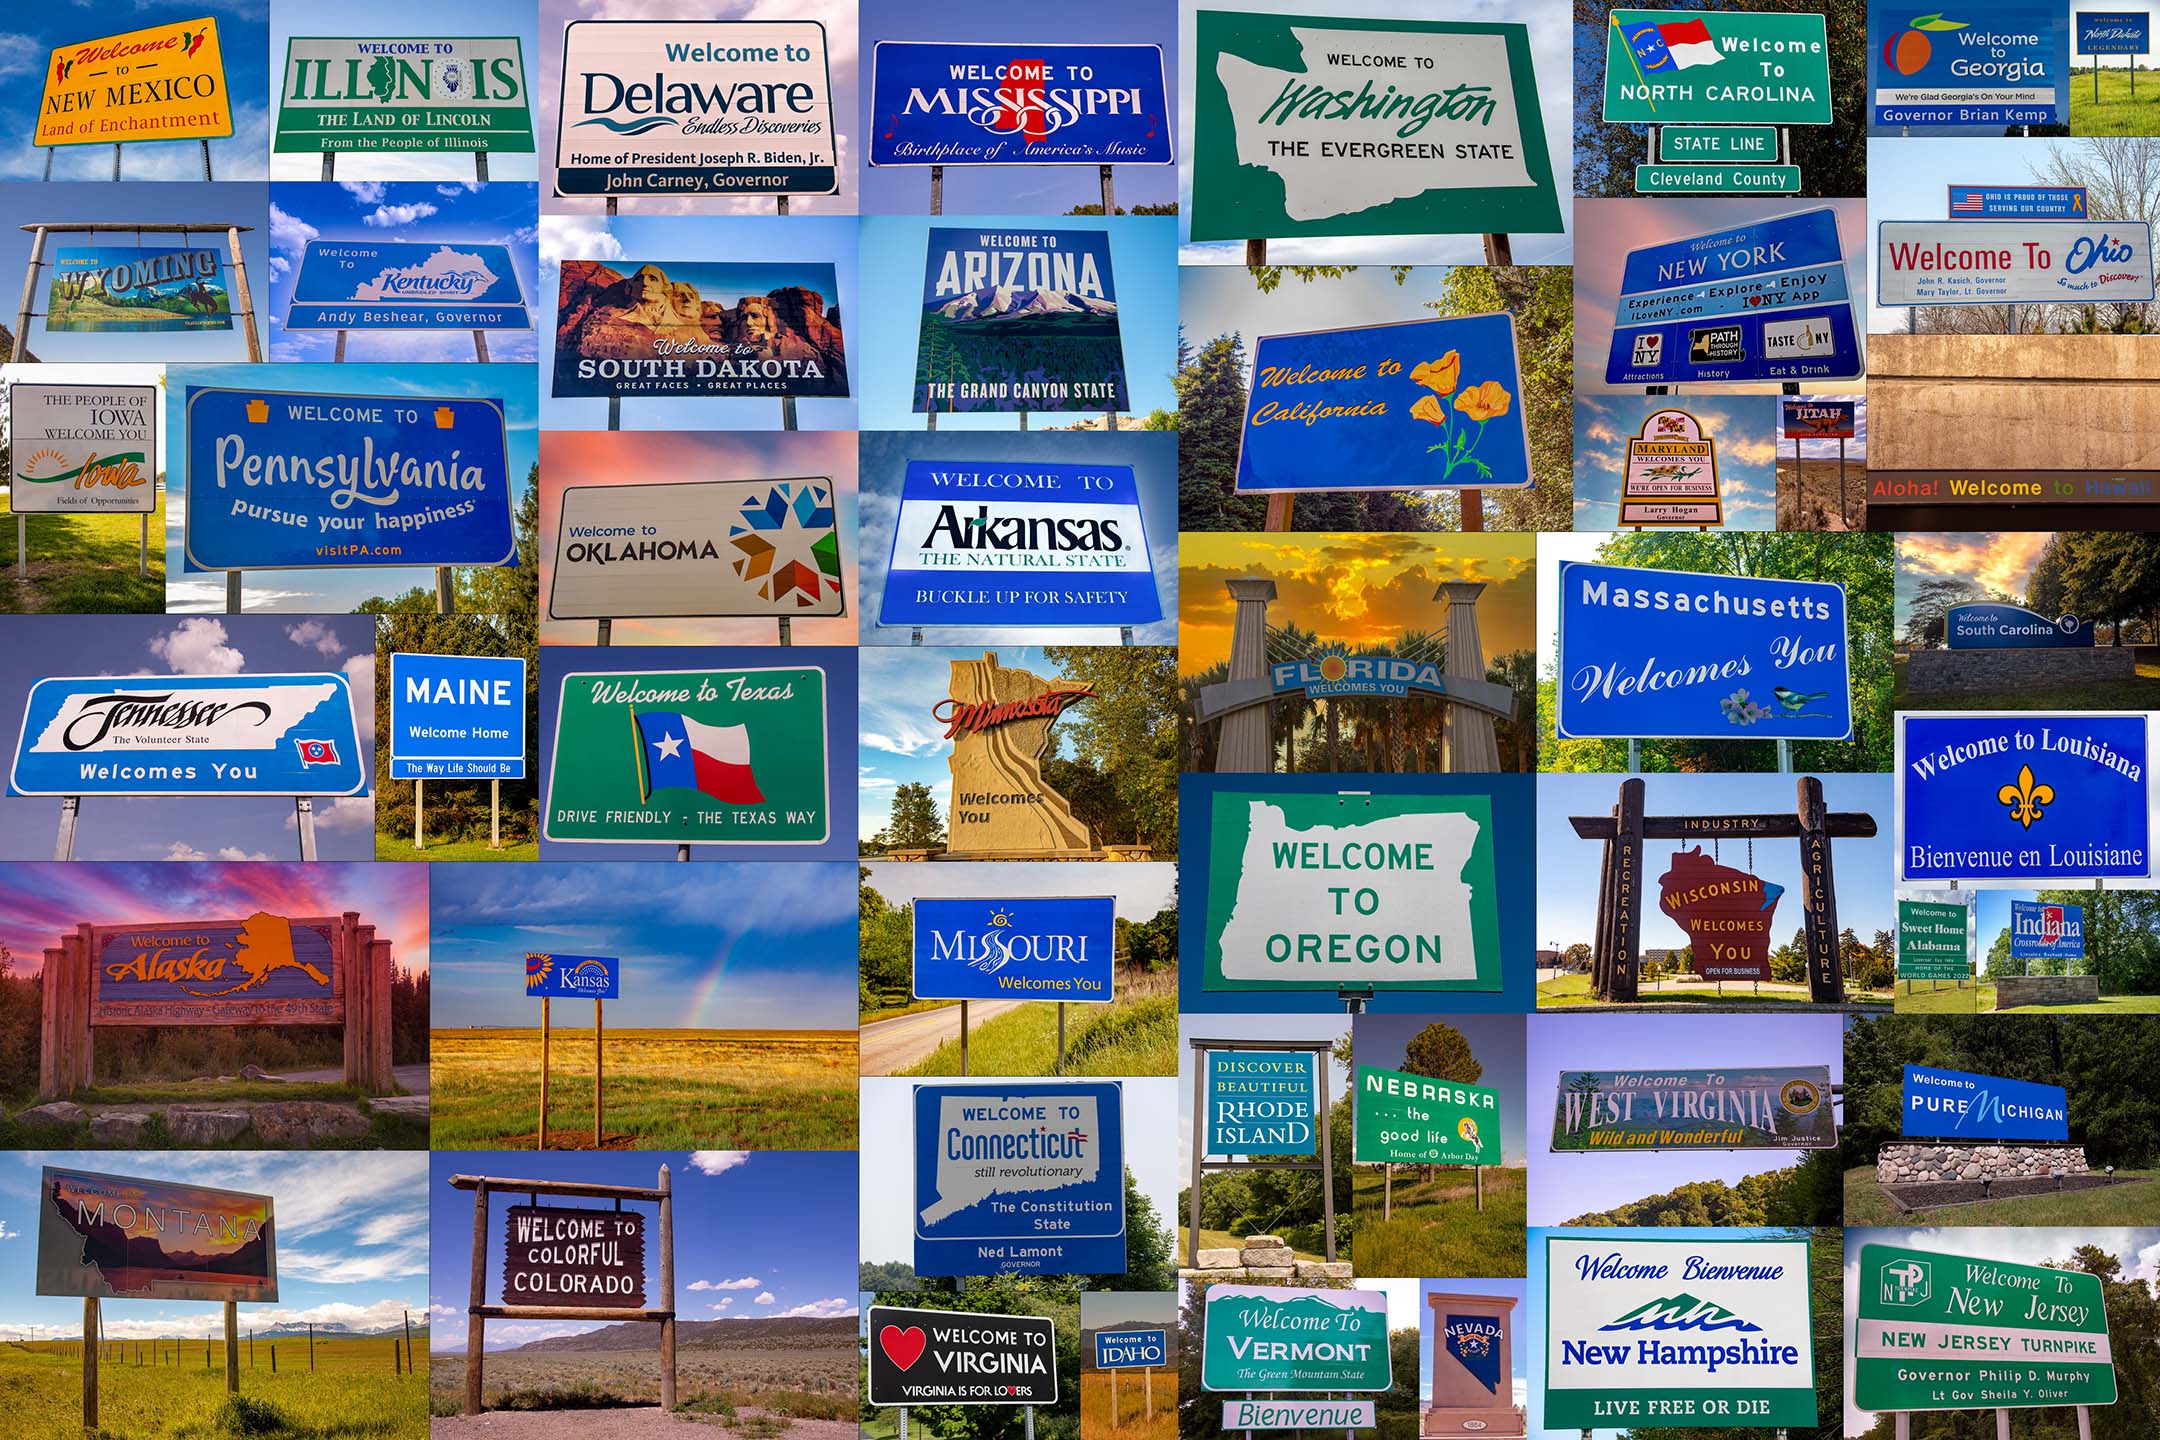 All 50 State Welcome Road Signs - It Took 3 Years to see all of them